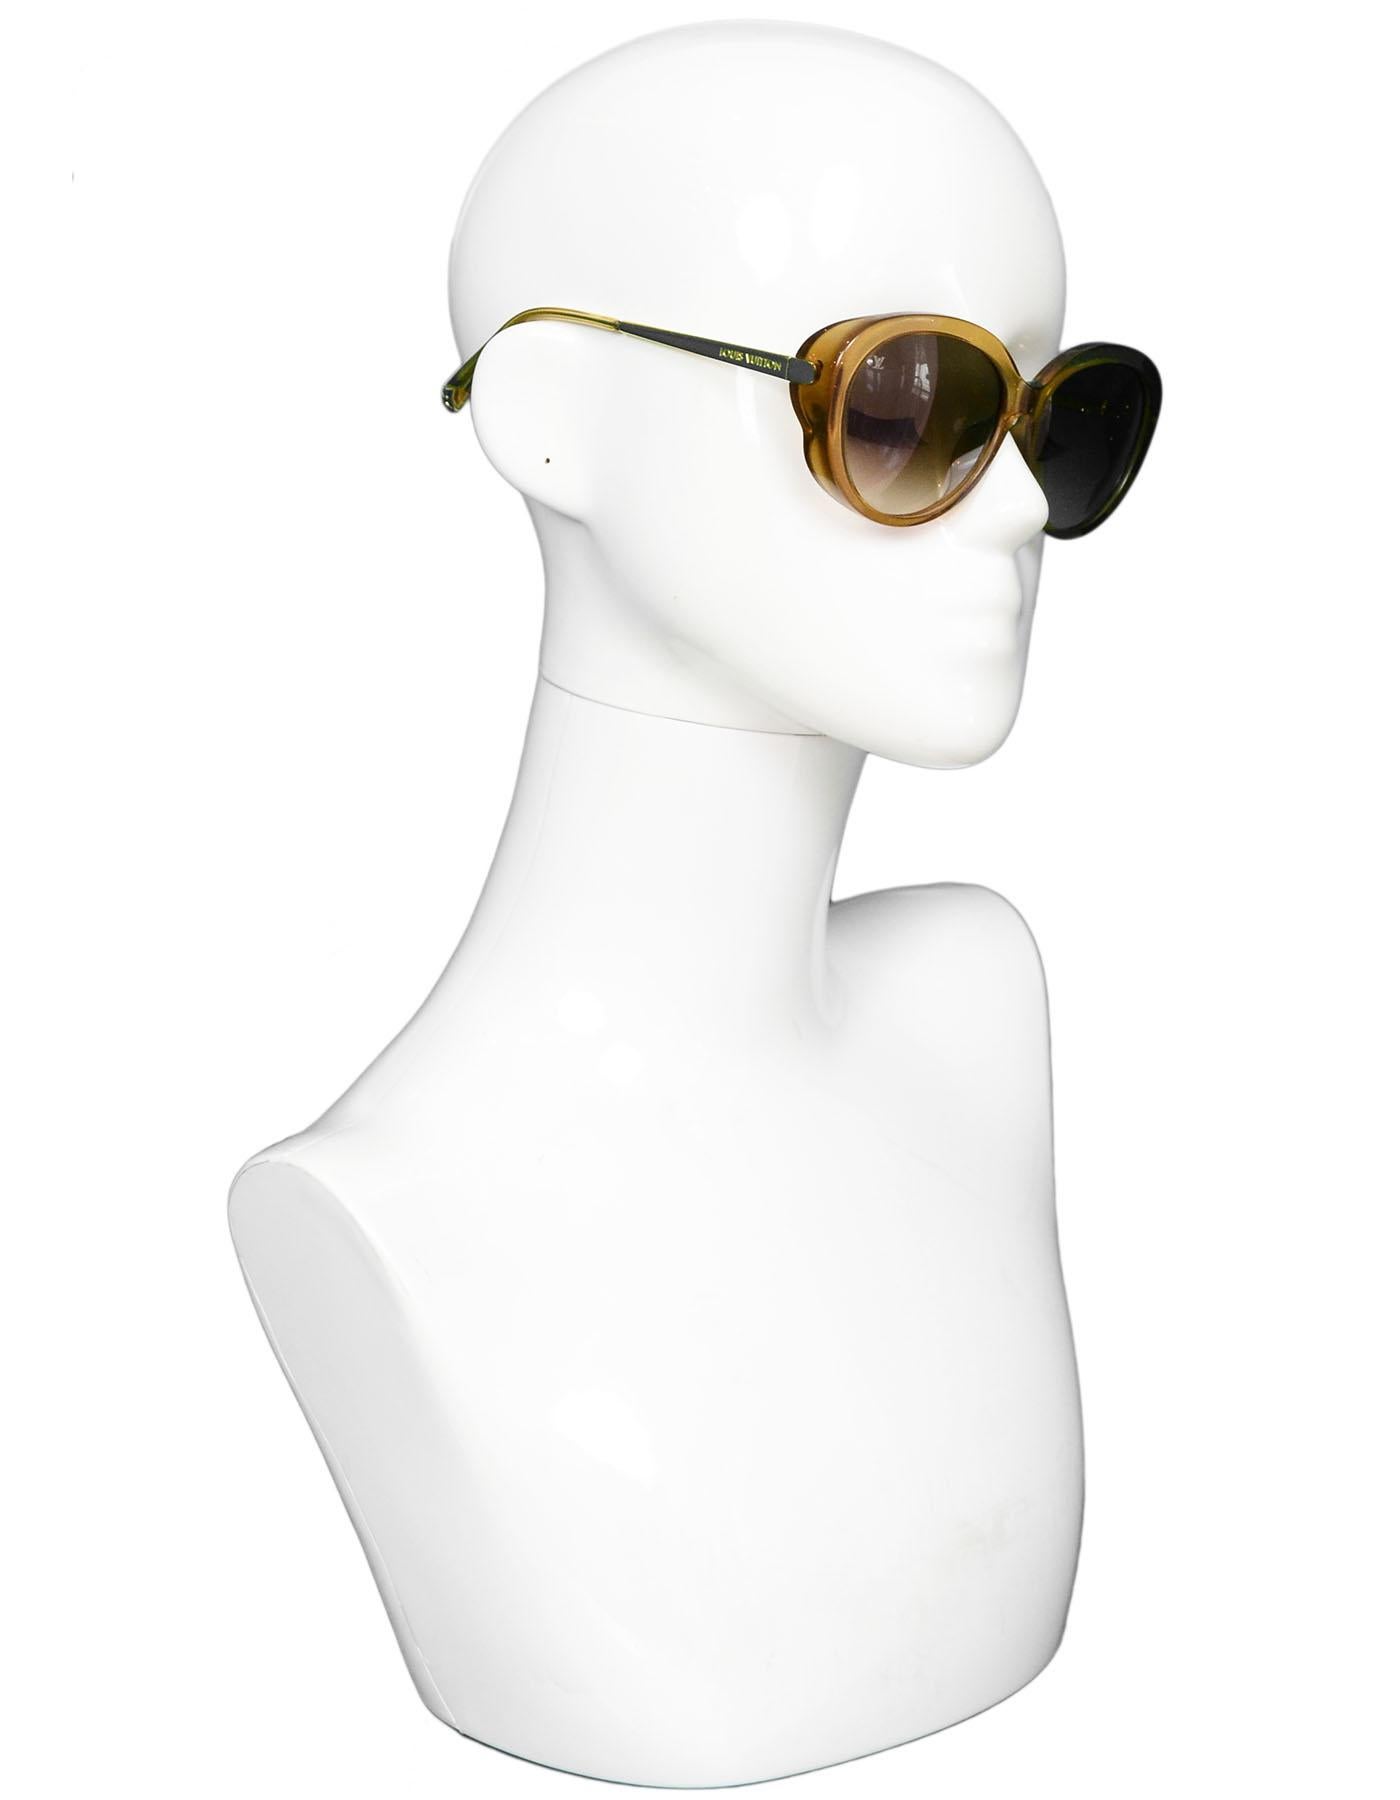 Louis Vuitton Honey Glitter Acetate Bluebell Sunglasses
Features fine glitter sparkles in frame

Made In: Italy
Color: Honey
Materials: Resin, metal
Overall Condition: Very good pre-owned condition with the exception of some lense scratches